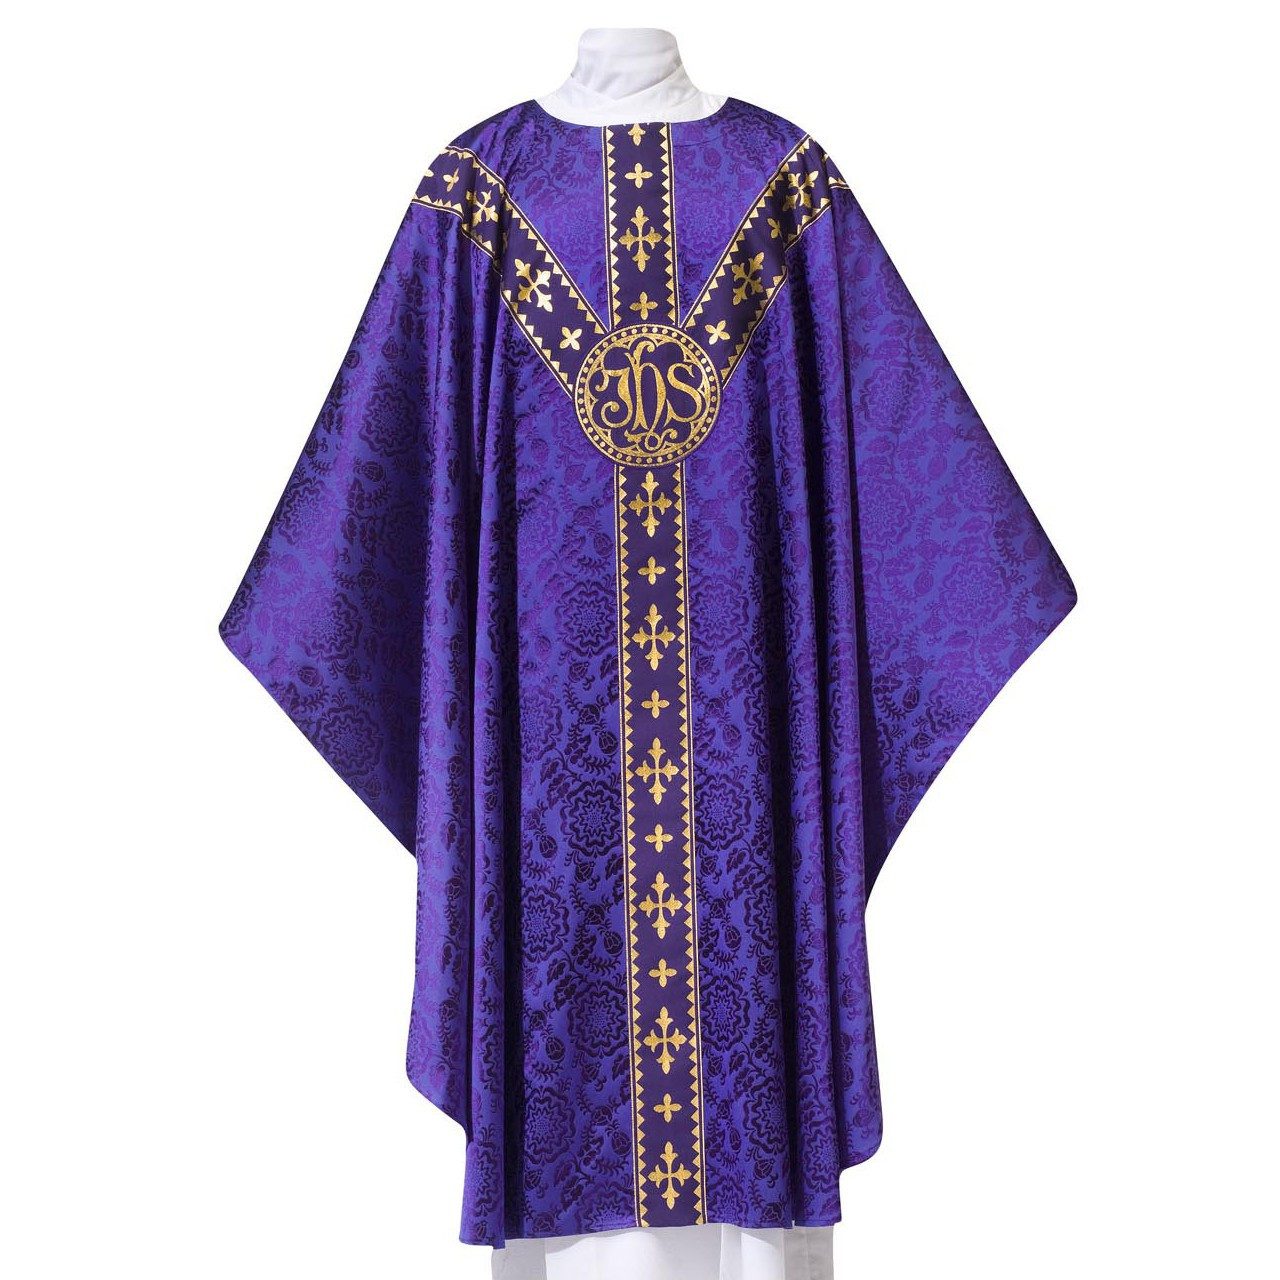 101-0930 JHS Chasuble in Tudor Rose Damask Purple